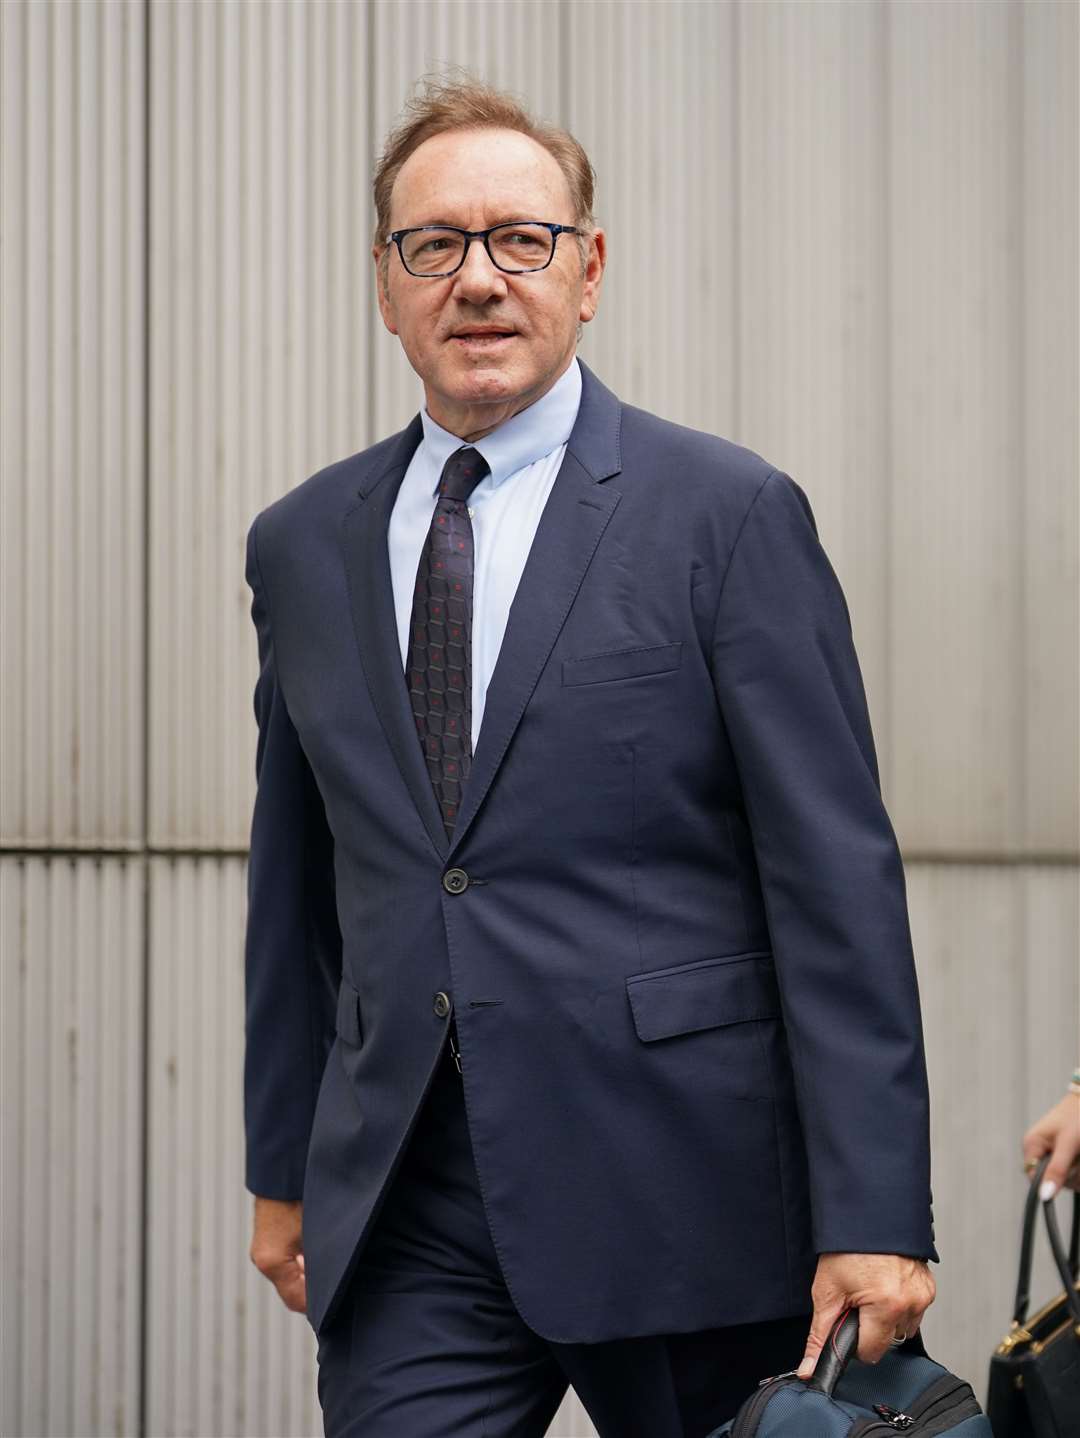 Spacey denies the allegations (Yui Mok/PA)